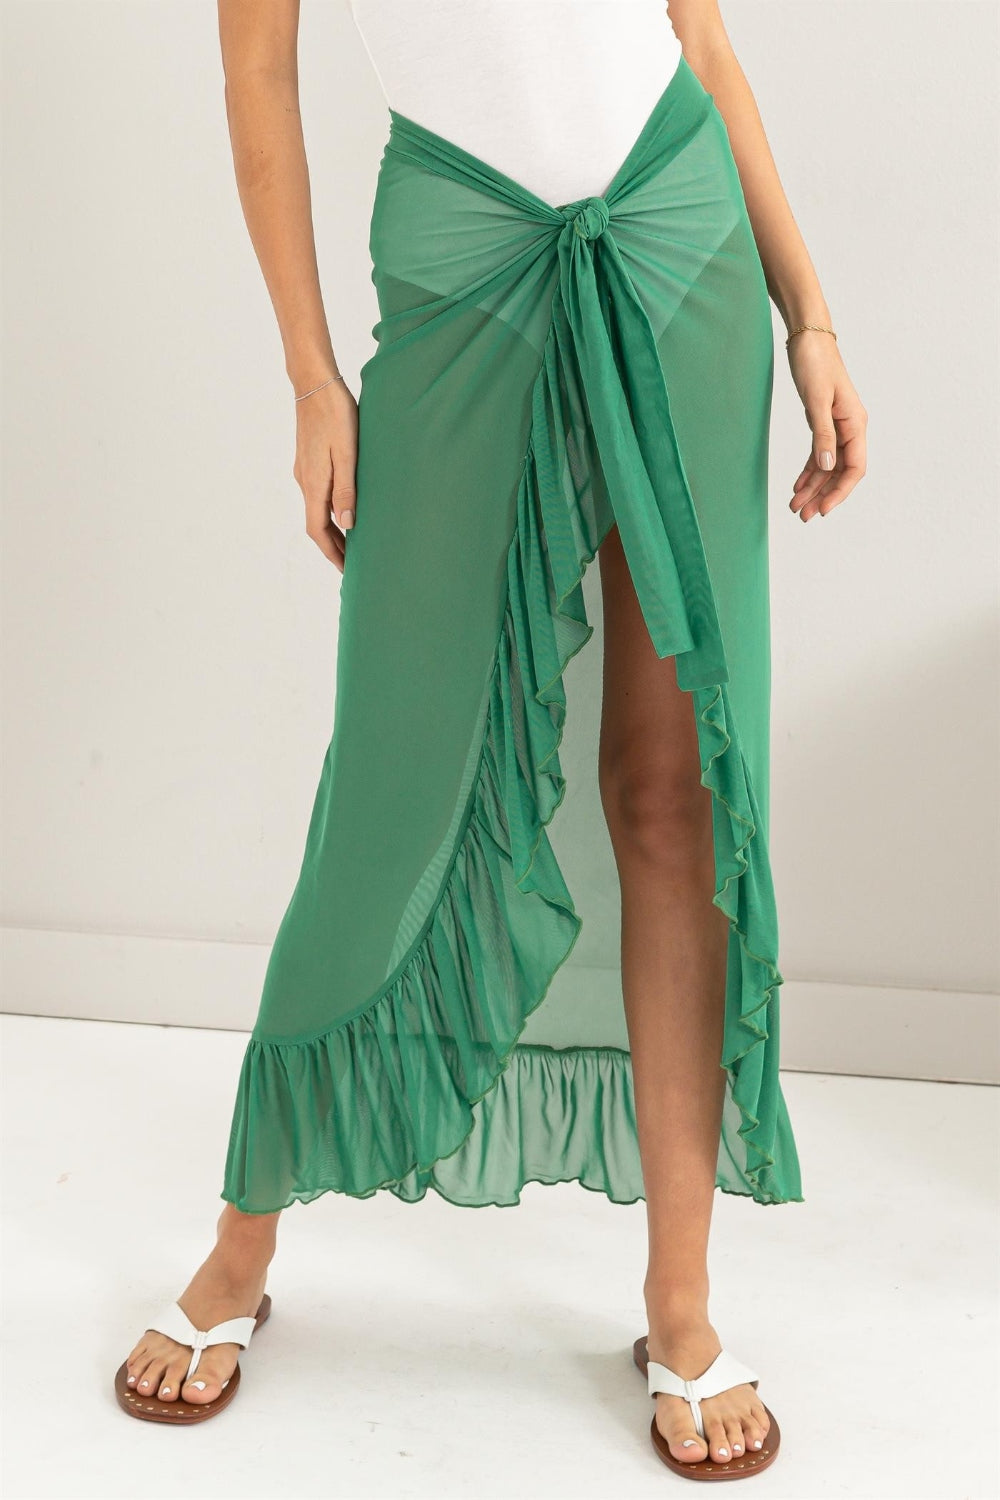 Dreamy Love Ruffle Trim Cover Up Sarong Skirt